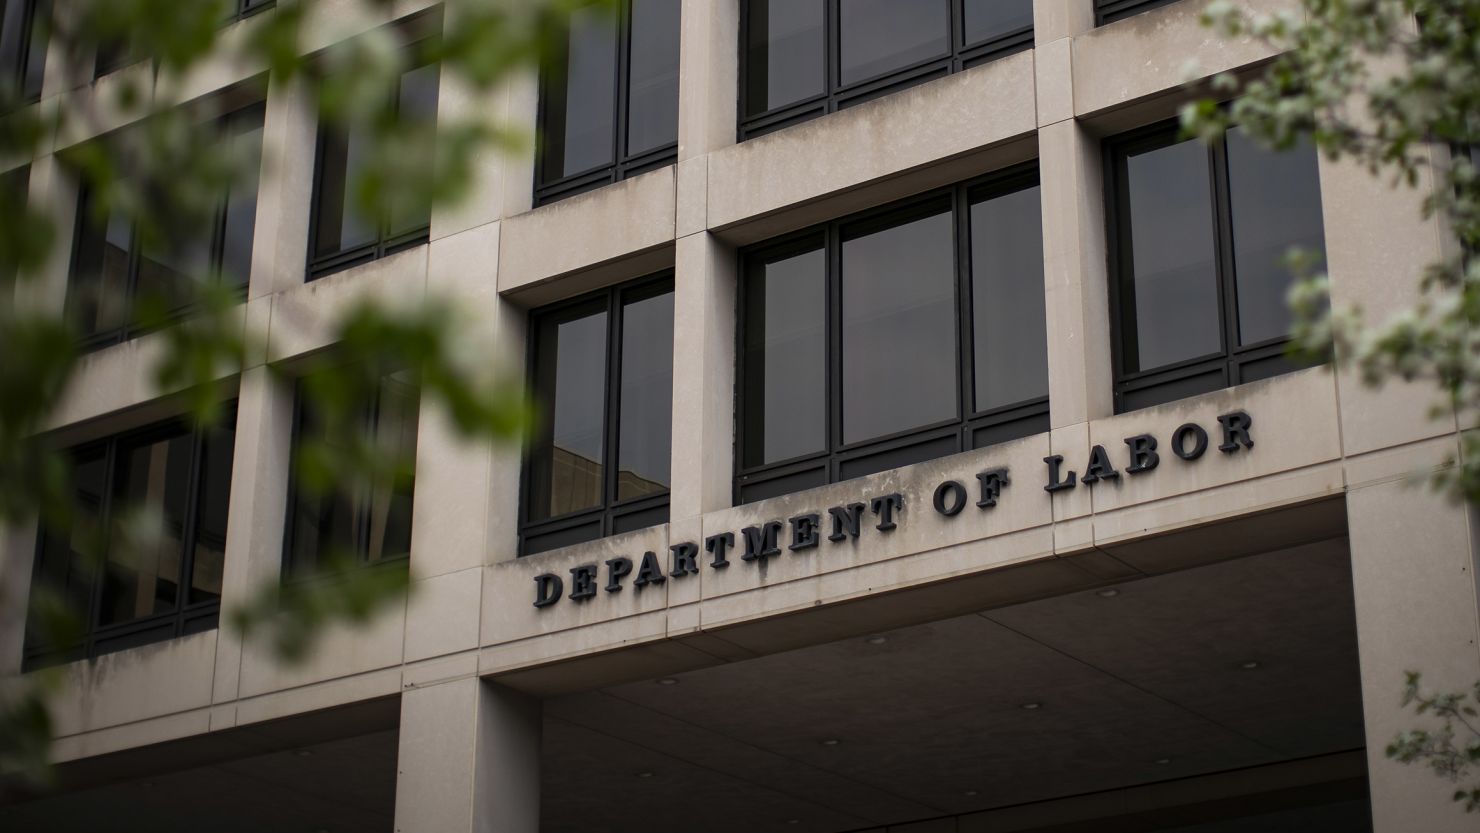 The U.S. Department of Labor headquarters in Washington, D.C. Photographer: Al Drago/Bloomberg via Getty Images